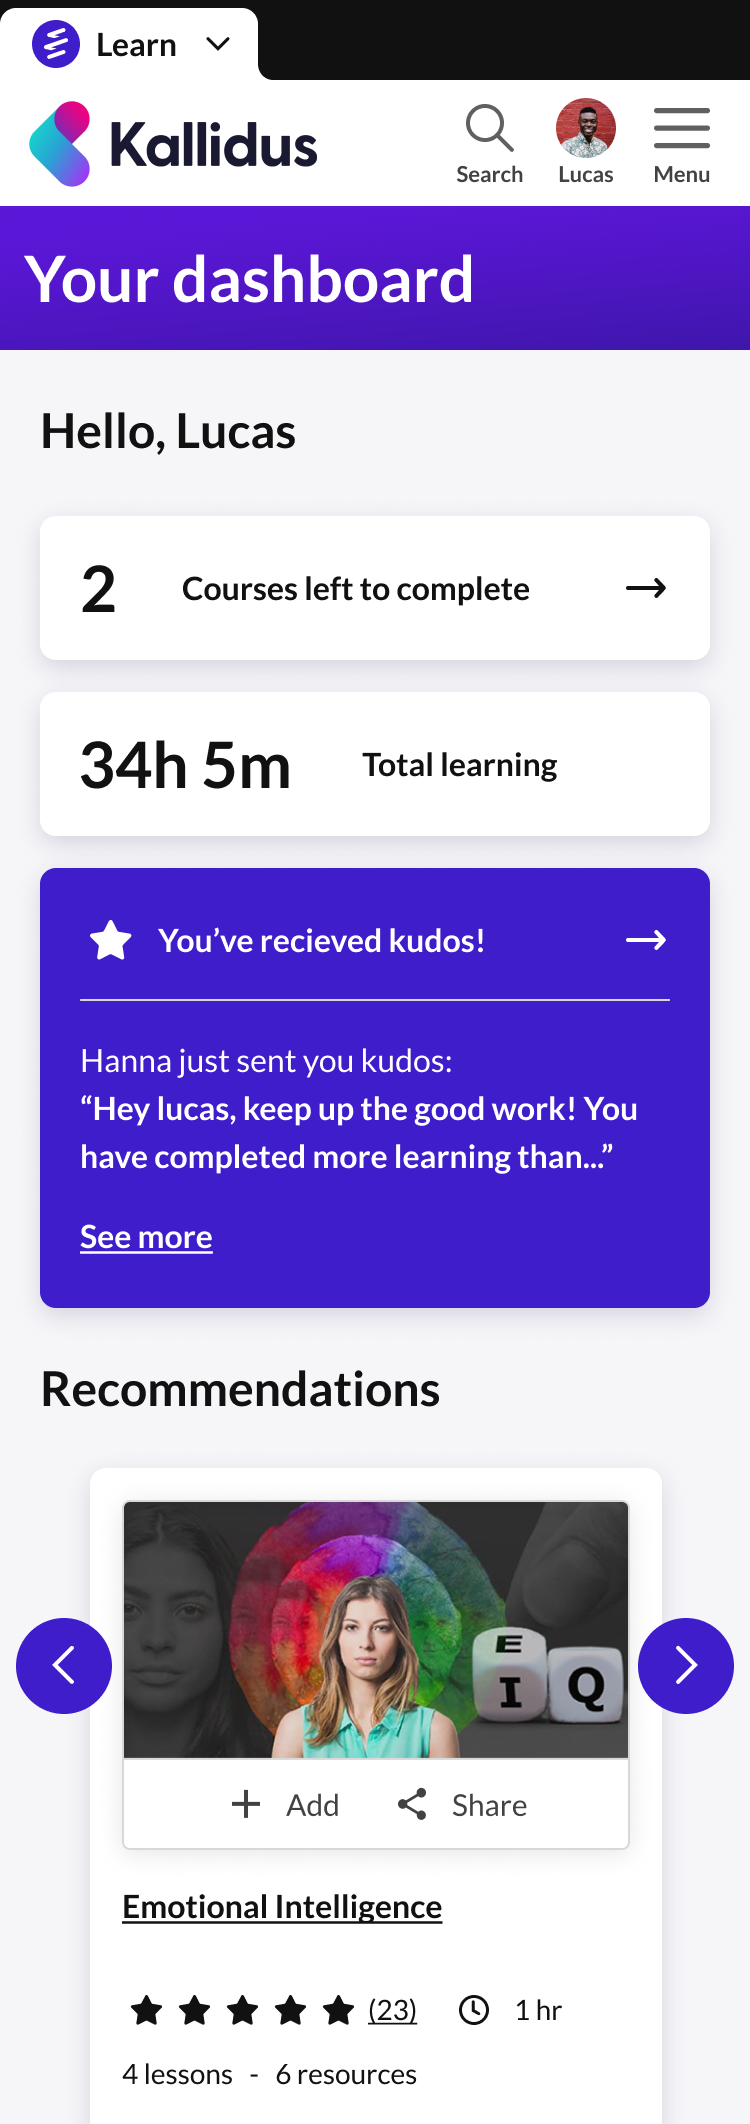 Learn kudos view 